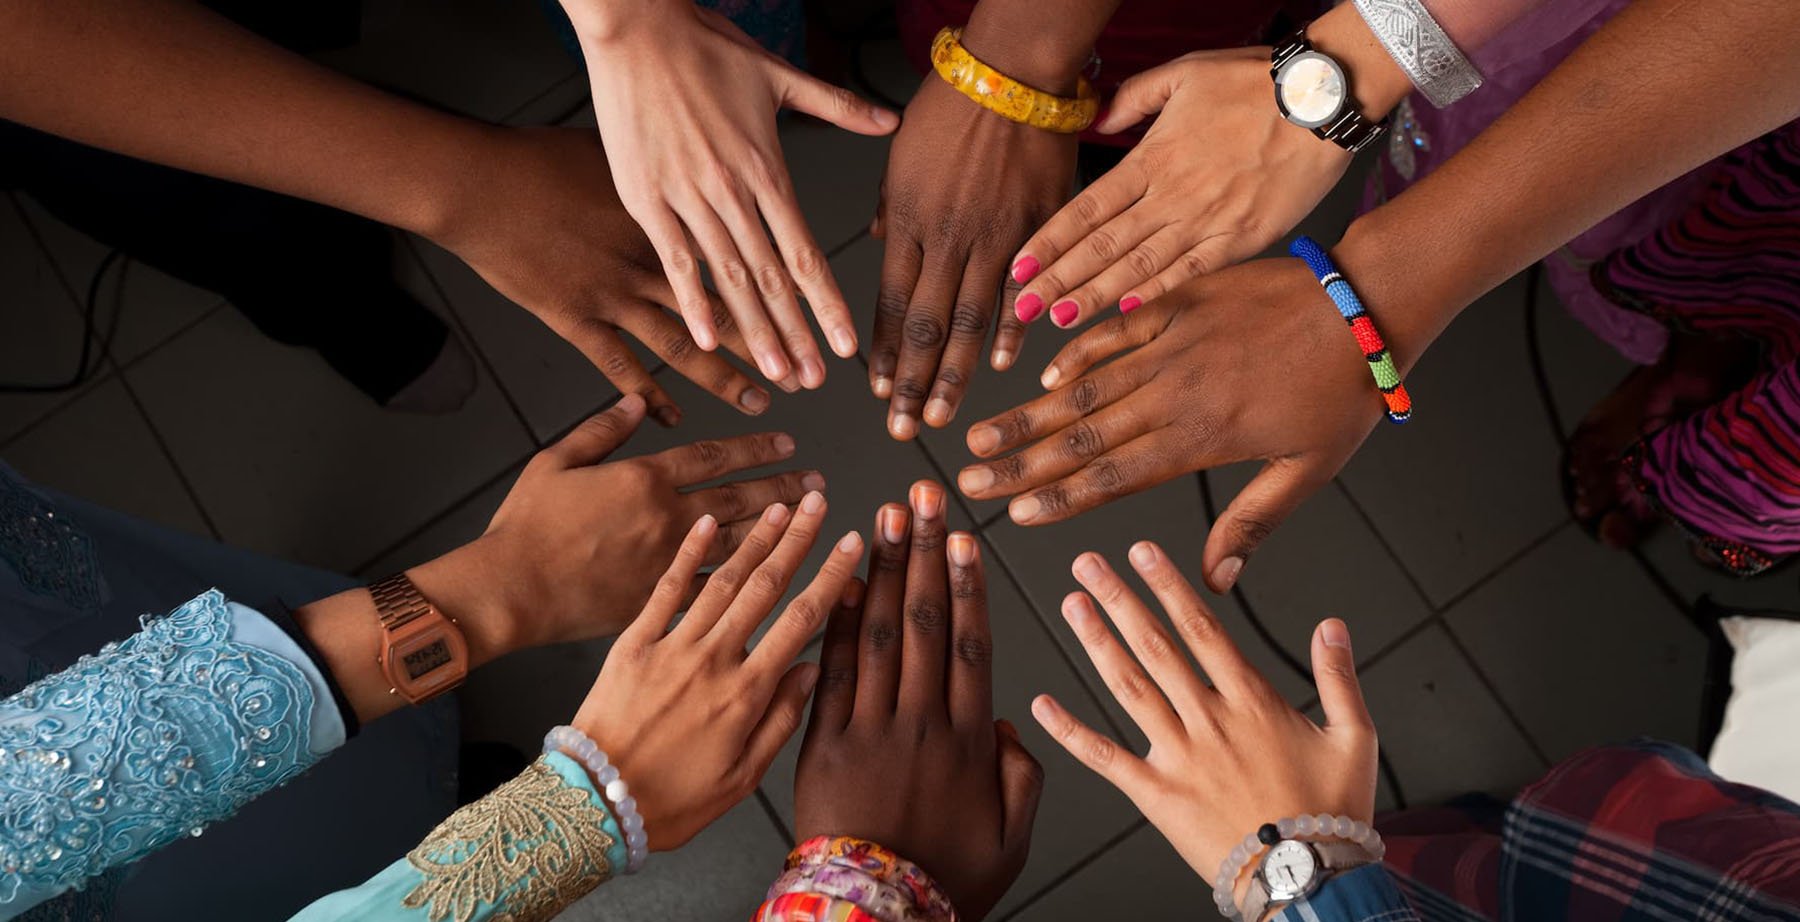 several hands, representing a diverse group of people, come together in a circle